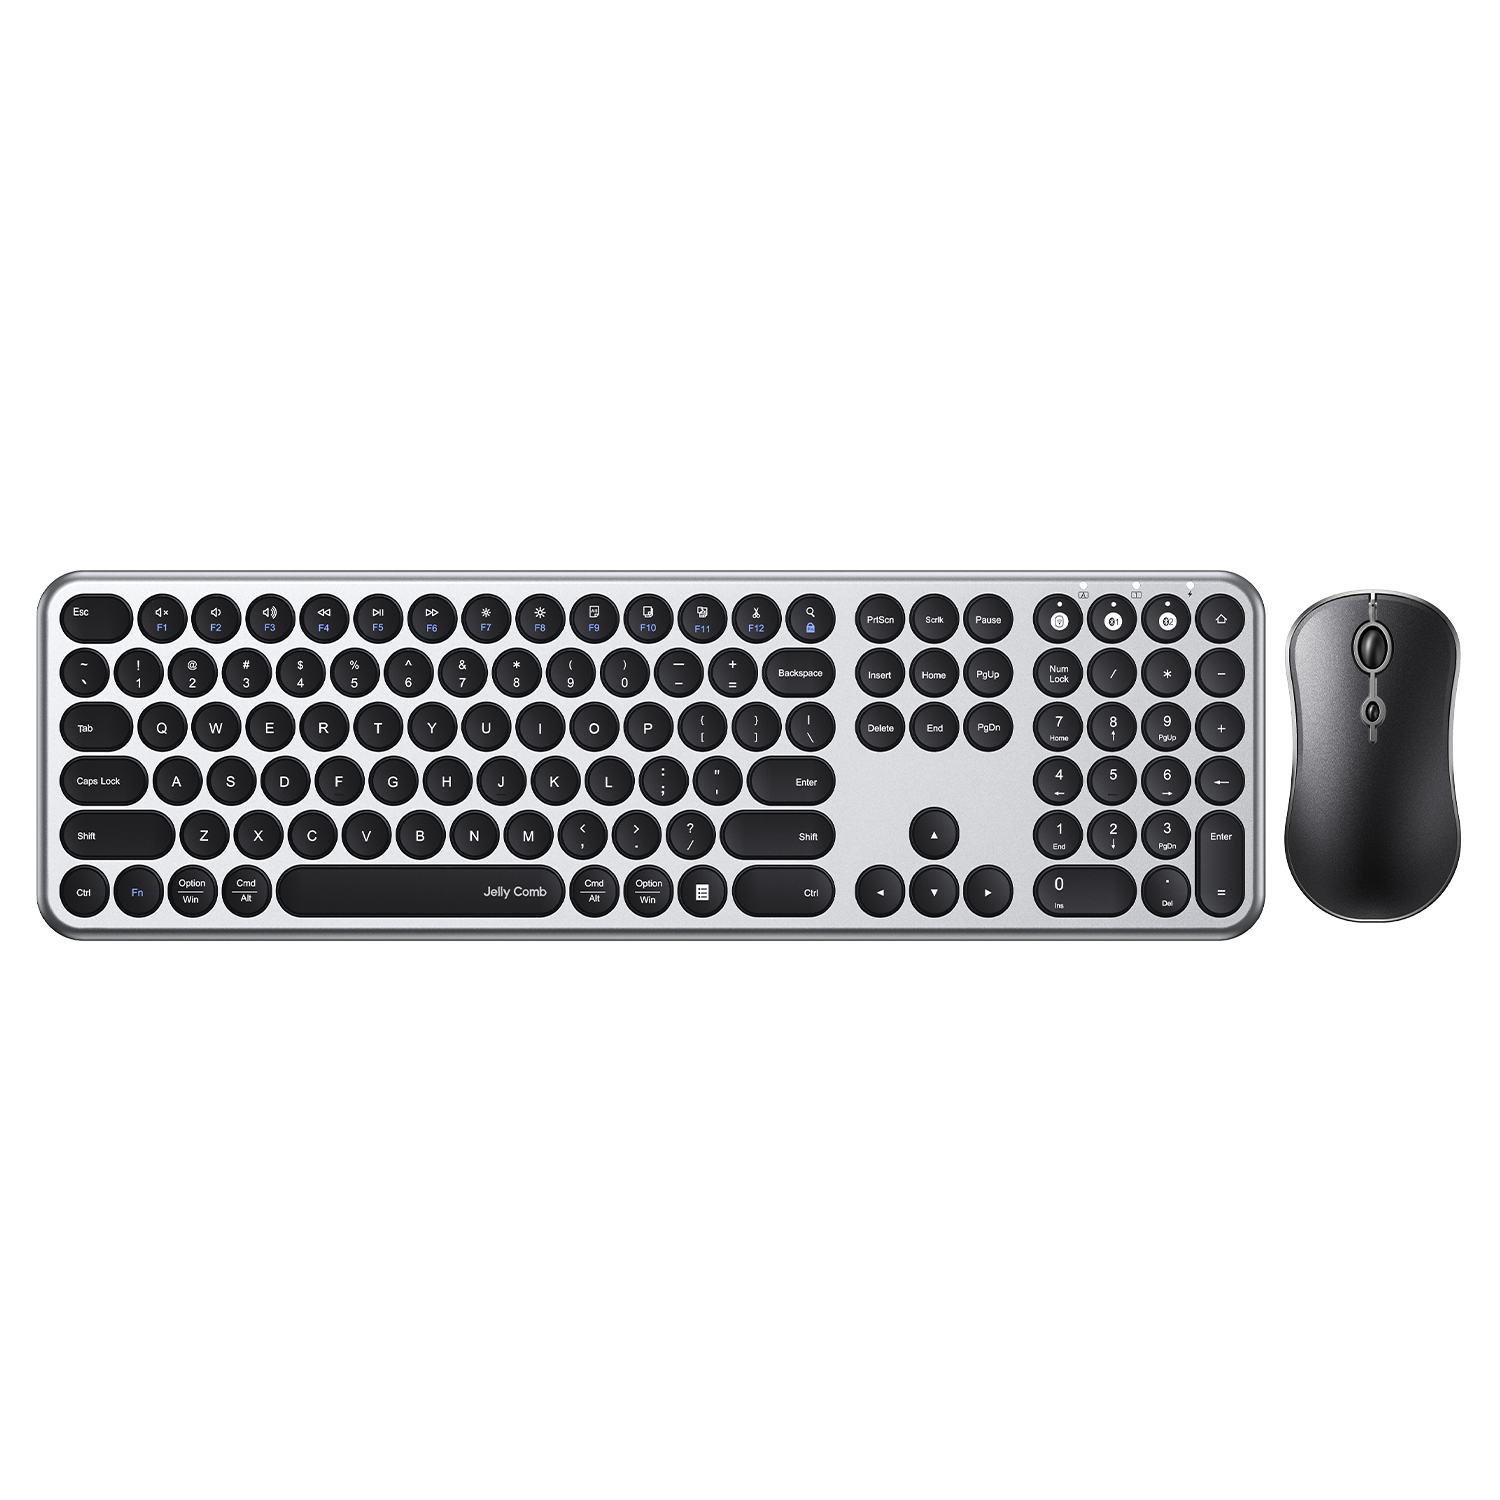 Clavier sans Fil Multi-dispositifs avec 3 Canal Bluetooth jelly comb, Clavier  AZERTY Ultra-Mince Rechargeable